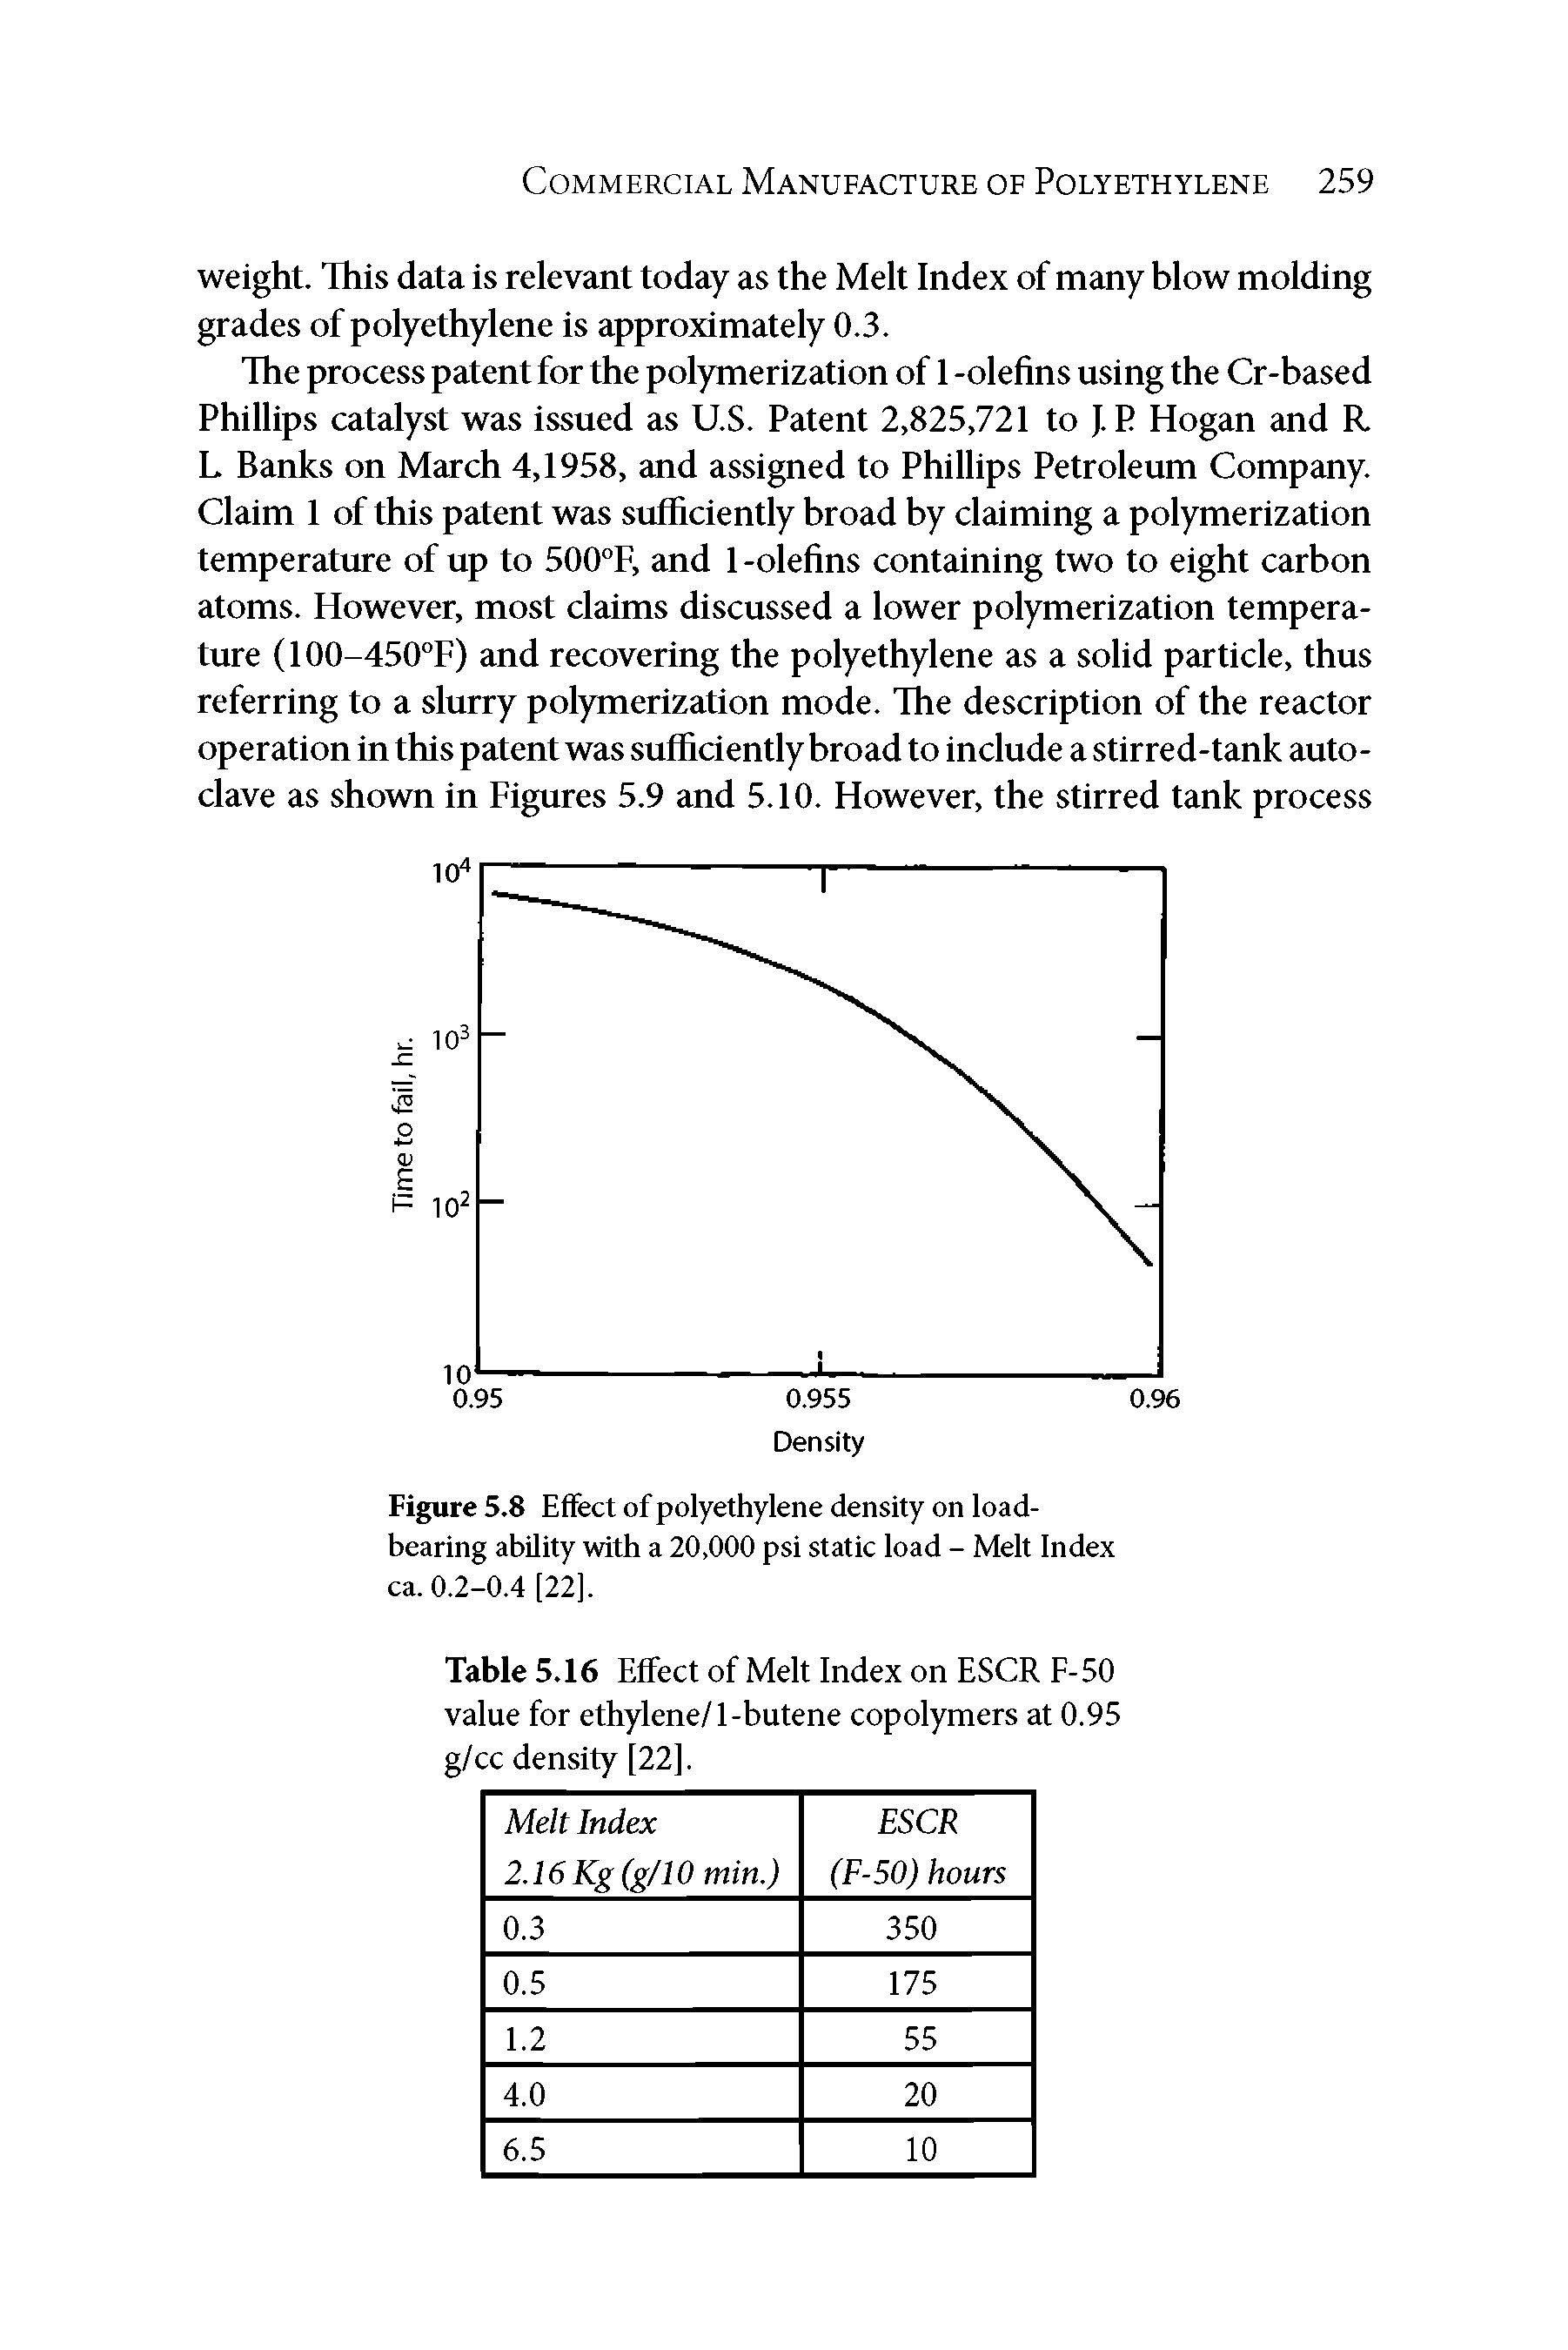 Figure 5.8 Effect of polyethylene density on load-bearing ability with a 20,000 psi static load - Melt Index ca. 0.2-0.4 [22].